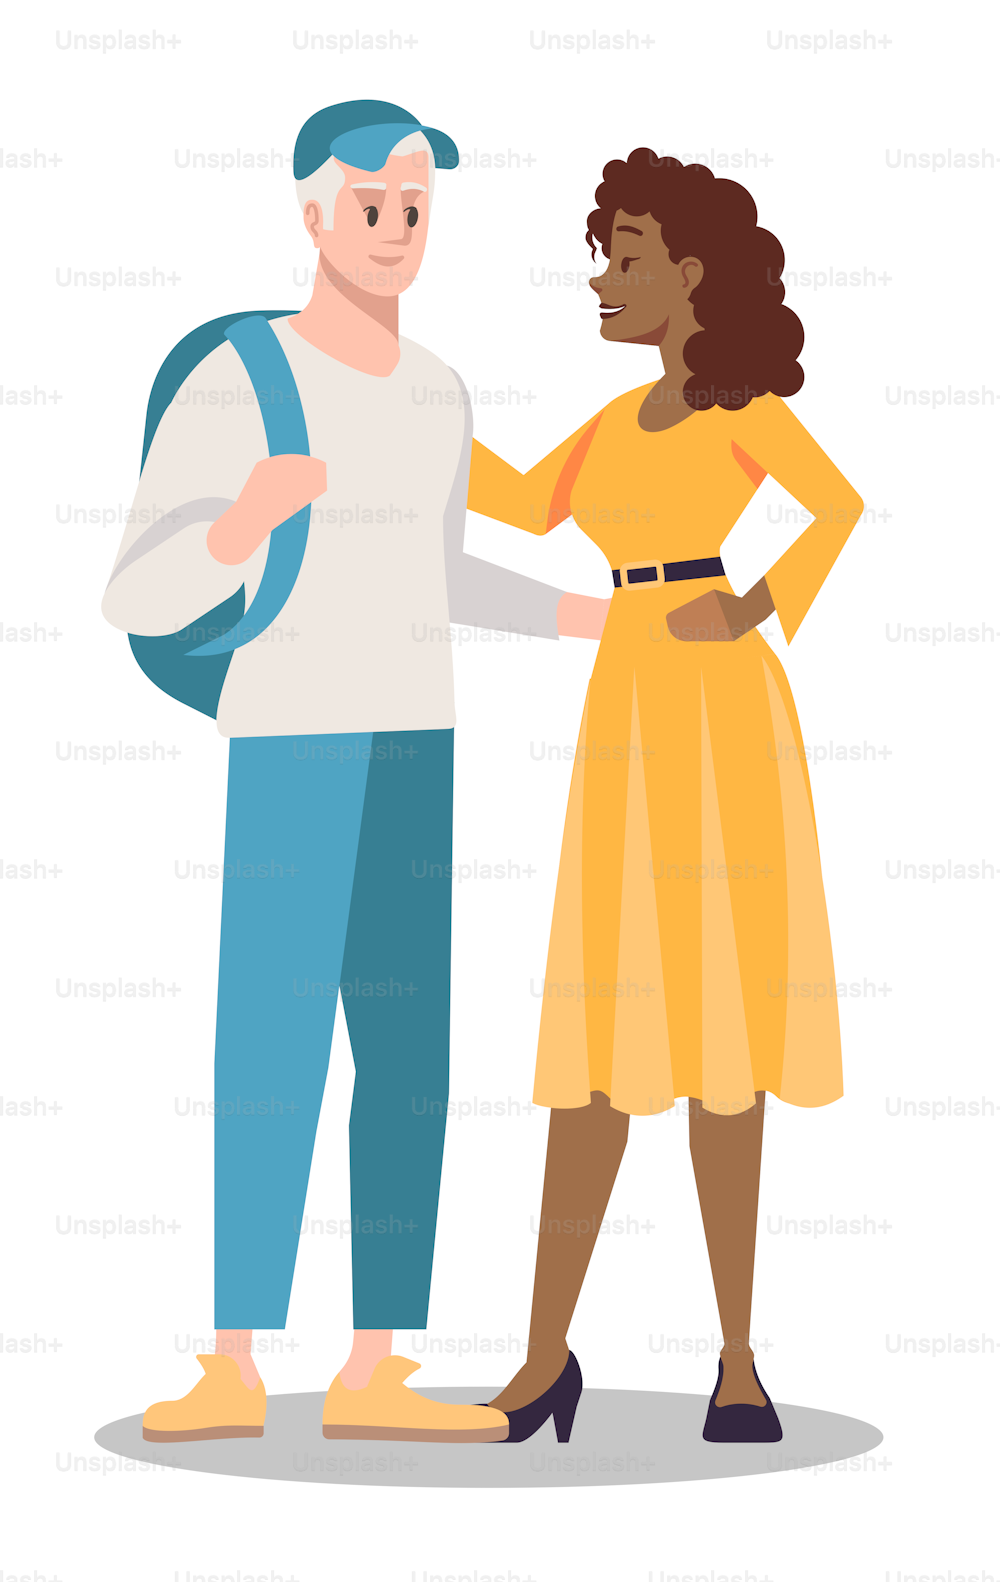 Diversity in friendship semi flat RGB color vector illustration. Diverse couple embracing each other isolated cartoon characters on white background